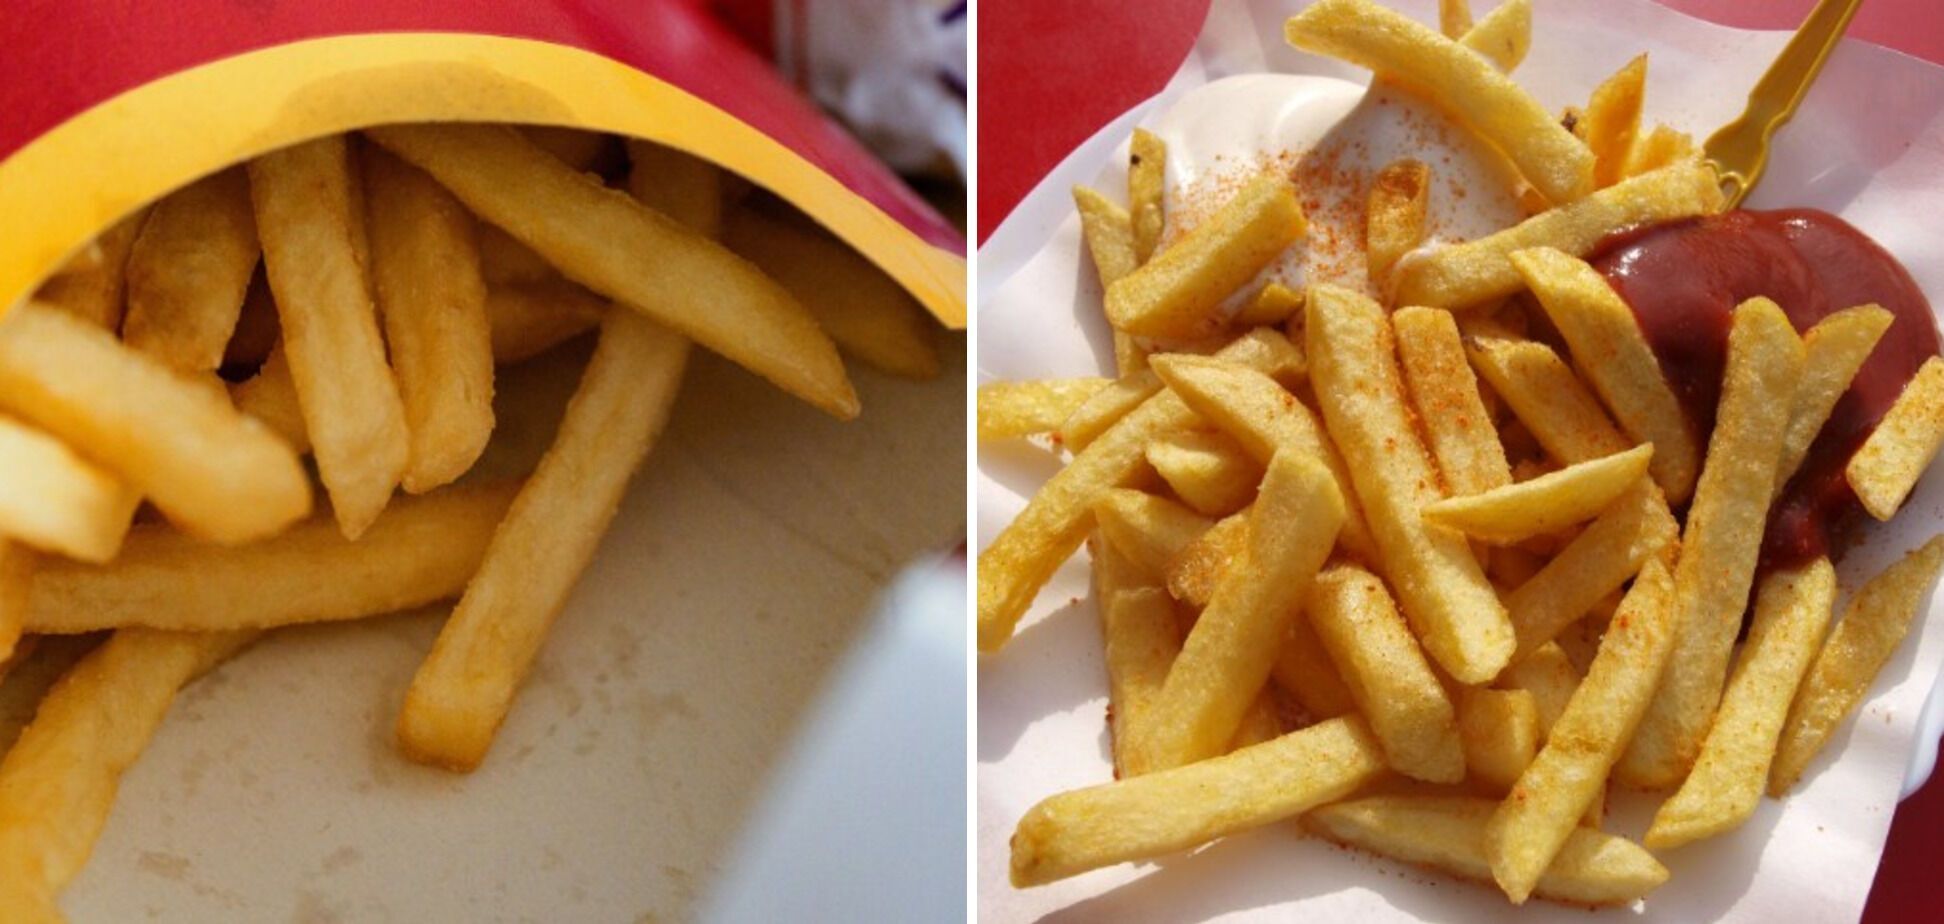 Recipe for French fries in the oven